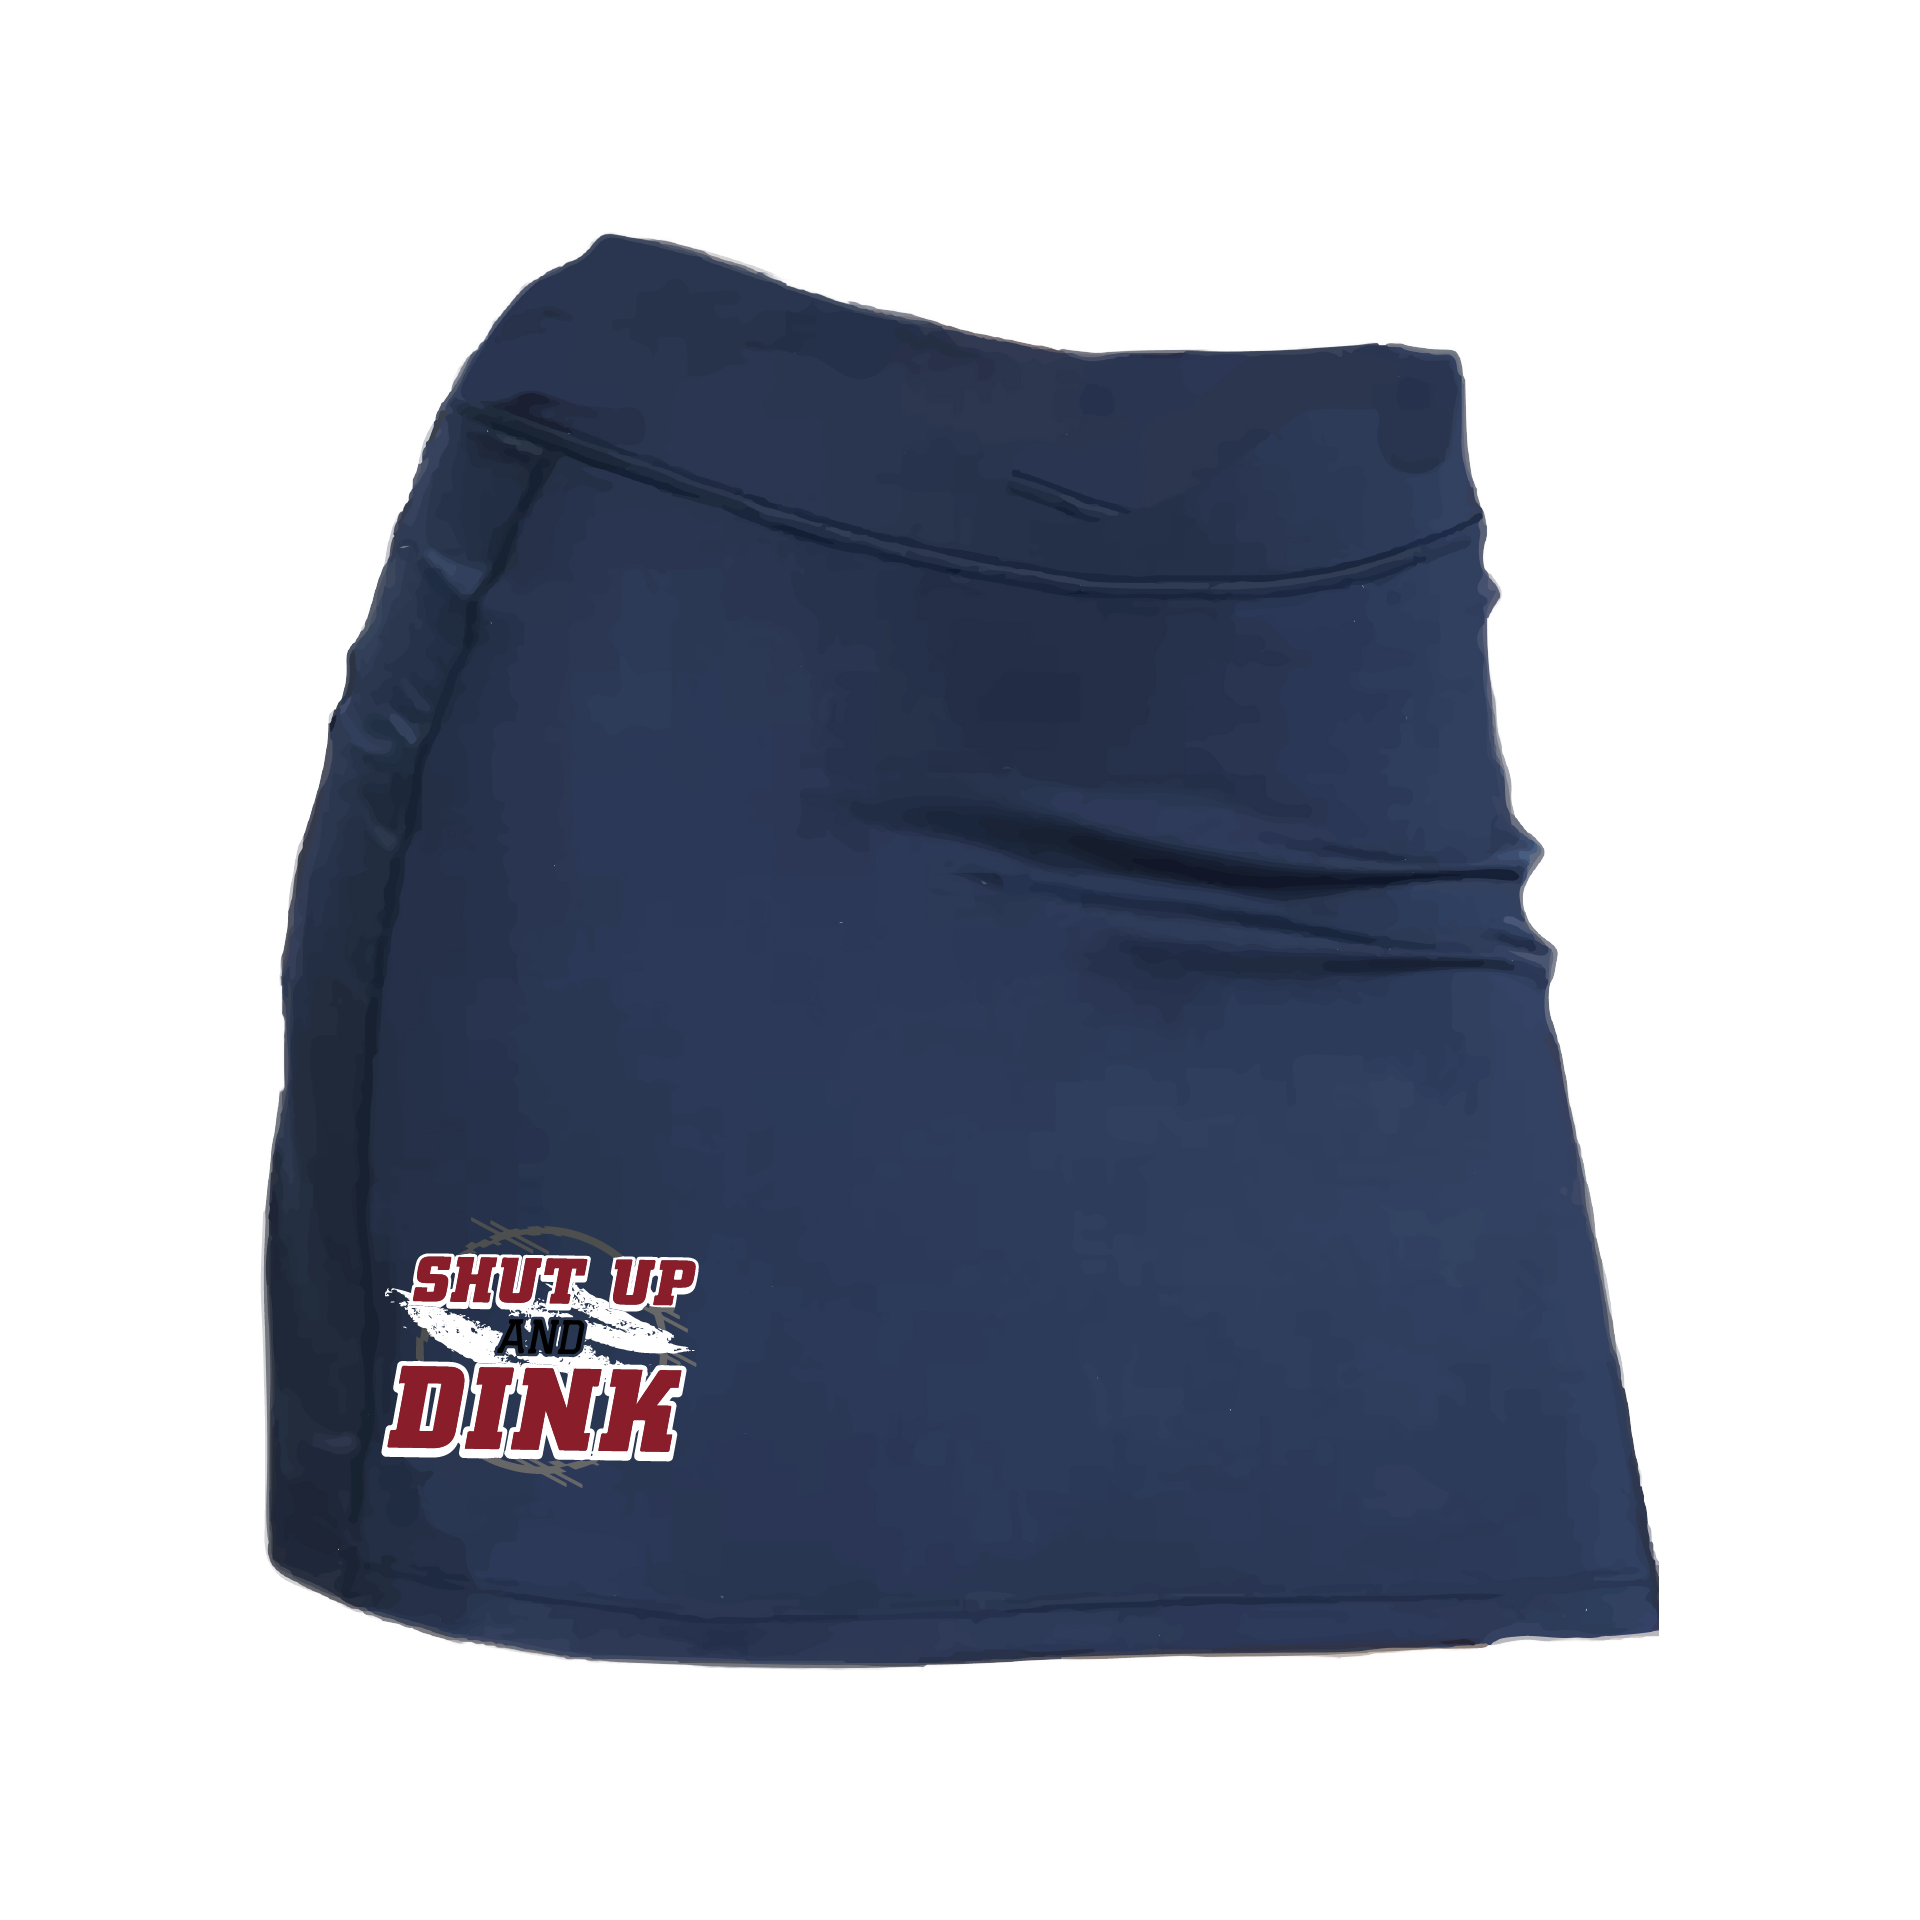 Pickleball Skort Design: Shut Up and Dink- Women’s core active jersey-knit skort comes with built-in shorts made out of a poly-spandex blend.  Feel secure knowing that no matter how strenuous the exercise, the skort will remain in place (it won’t ride up!). The fabric is breathable, featuring Dri-Works wicking technology. As you perspire, it allows your skin to breathe while simultaneously absorbing the moisture, keeping you dry and comfortable.